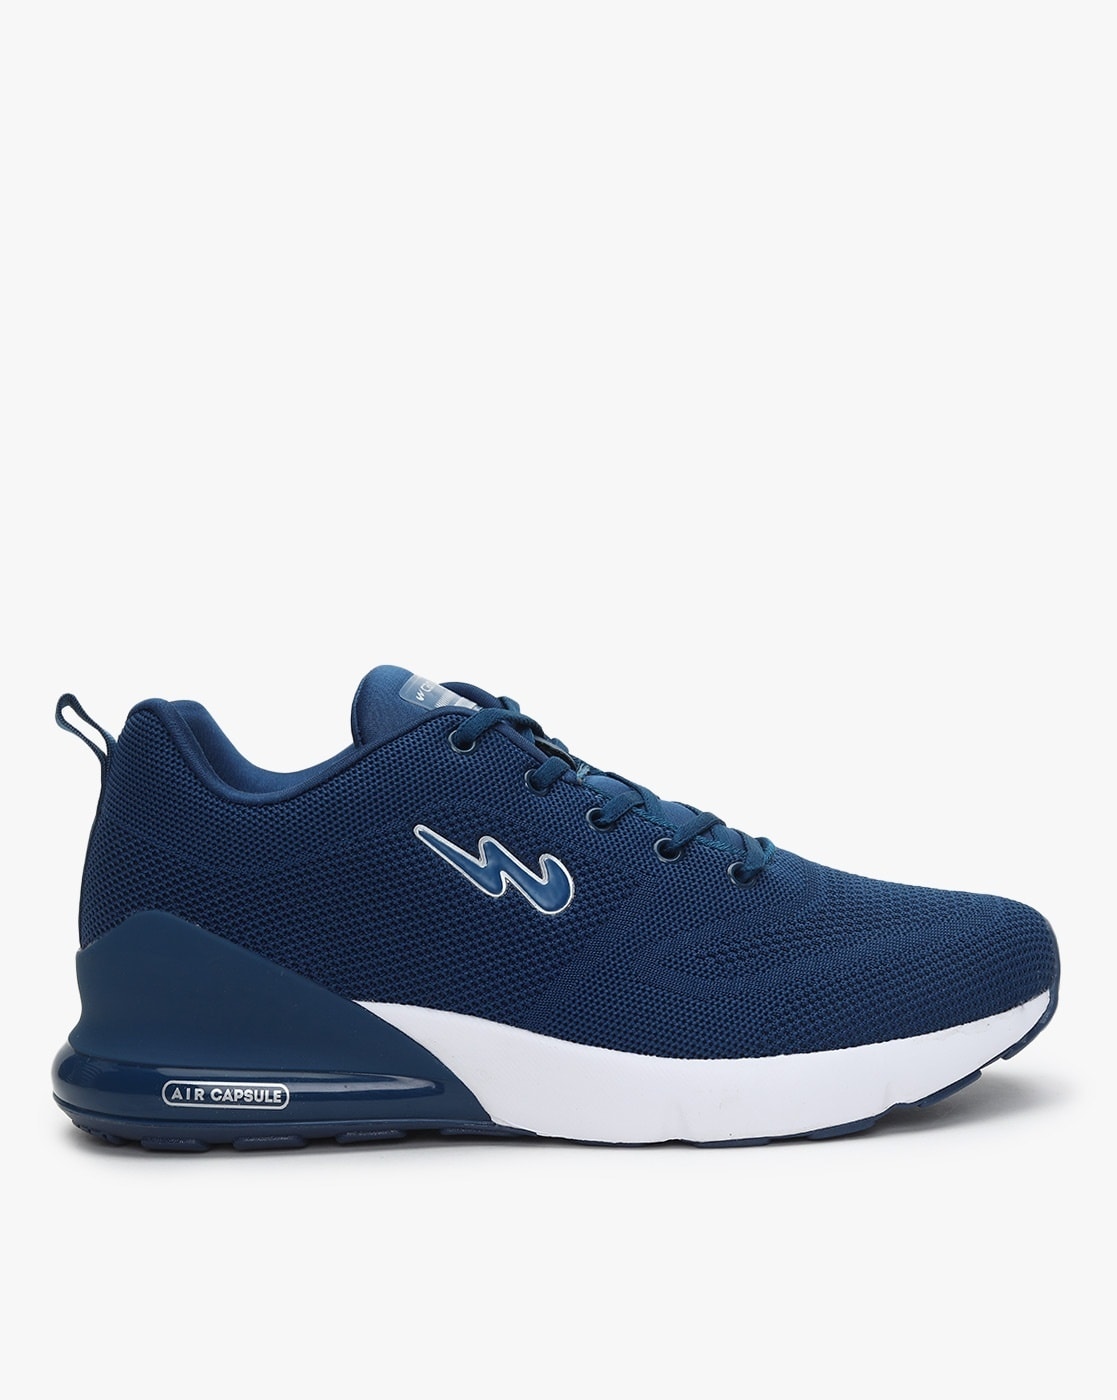 Buy Blue Sports Shoes for Men by Campus Online 